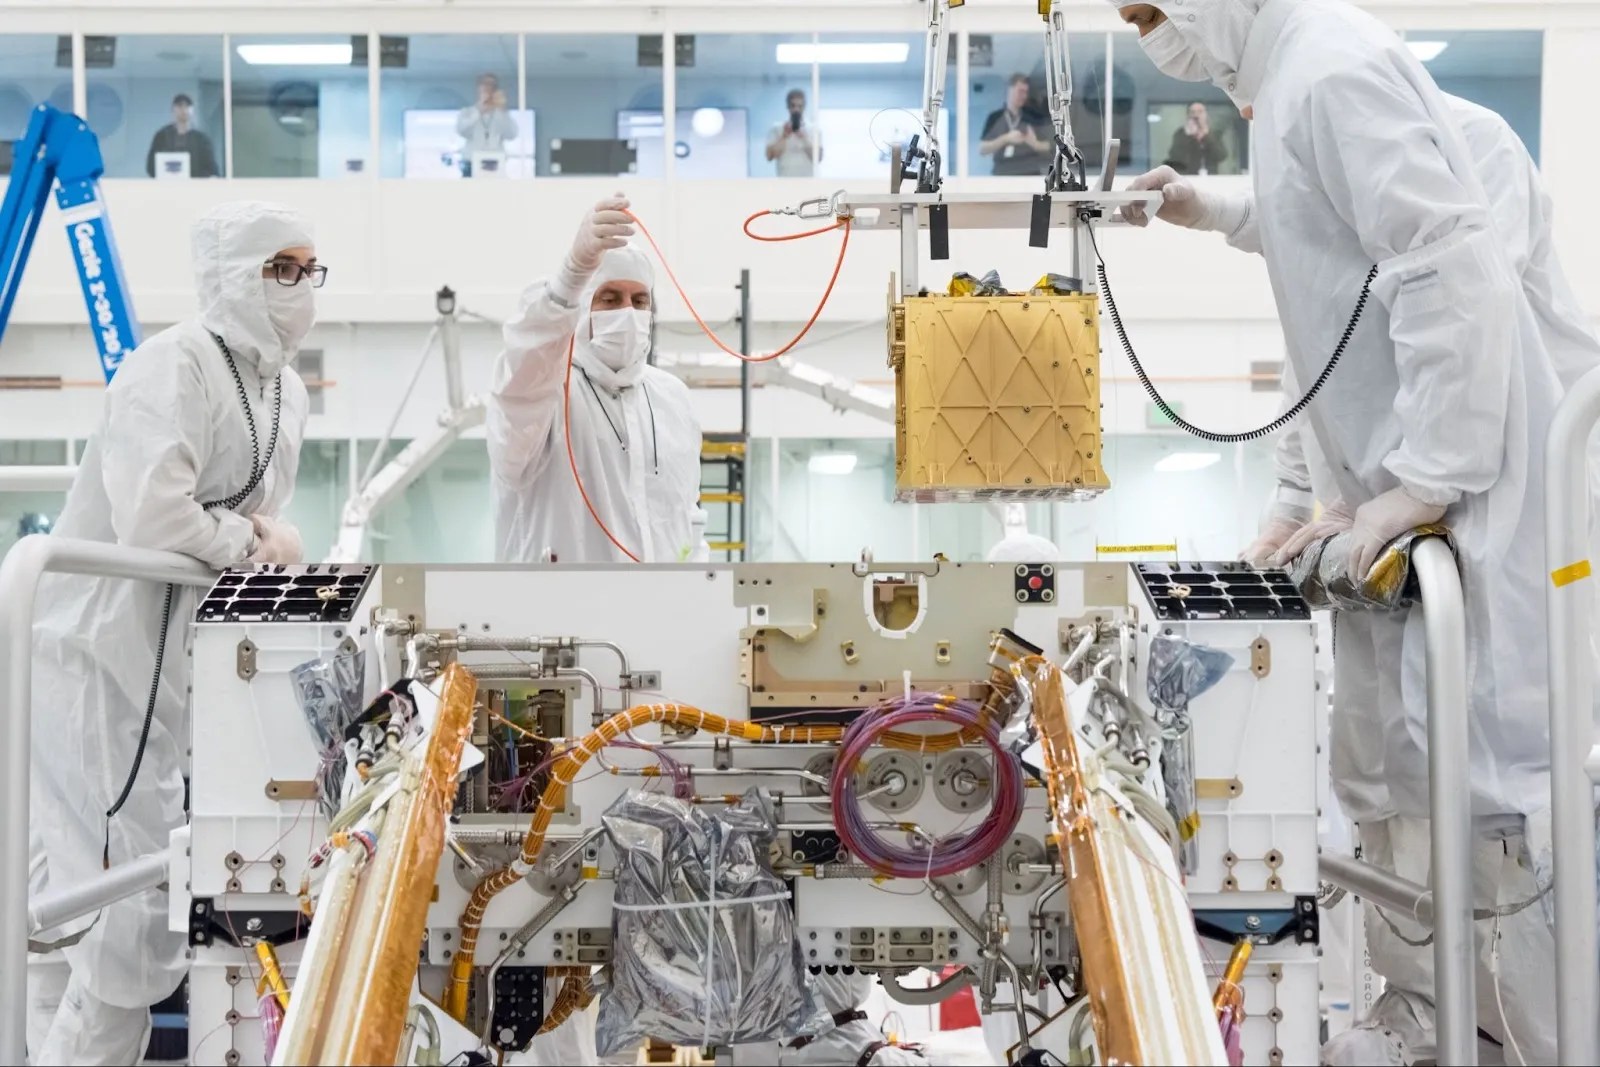 Scientists in white protective suits work on assembling a complex machine in a cleanroom environment, with various technical instruments and wires visible.